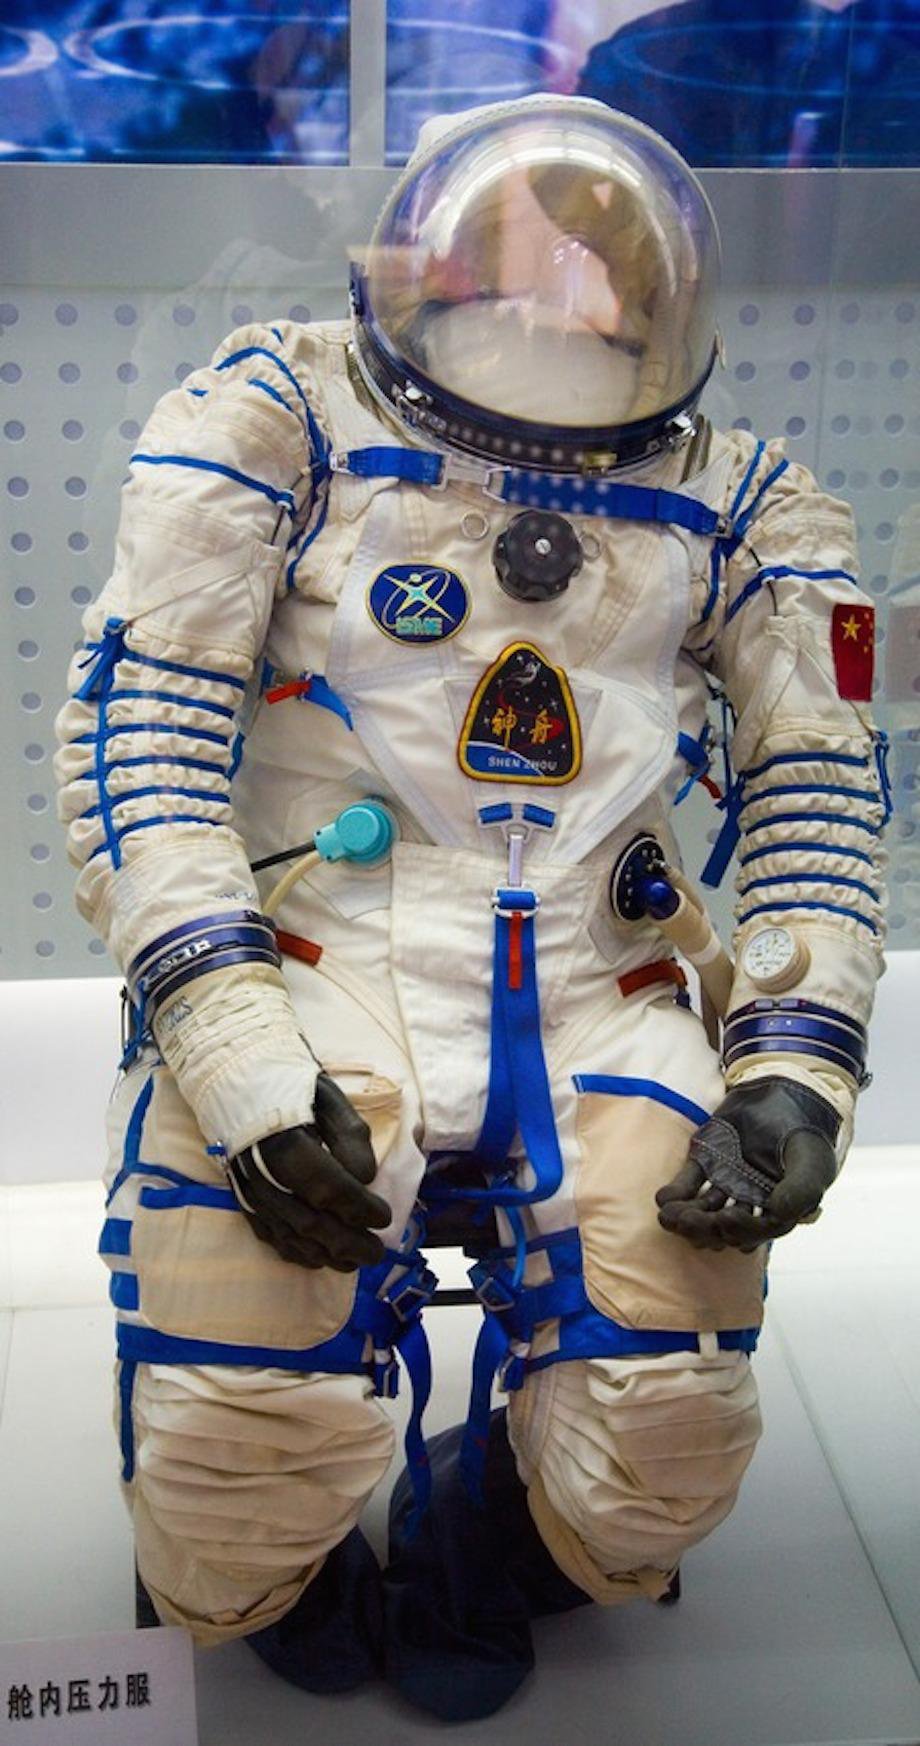 check-out-the-evolution-of-the-space-suit-41-hq-photos-27